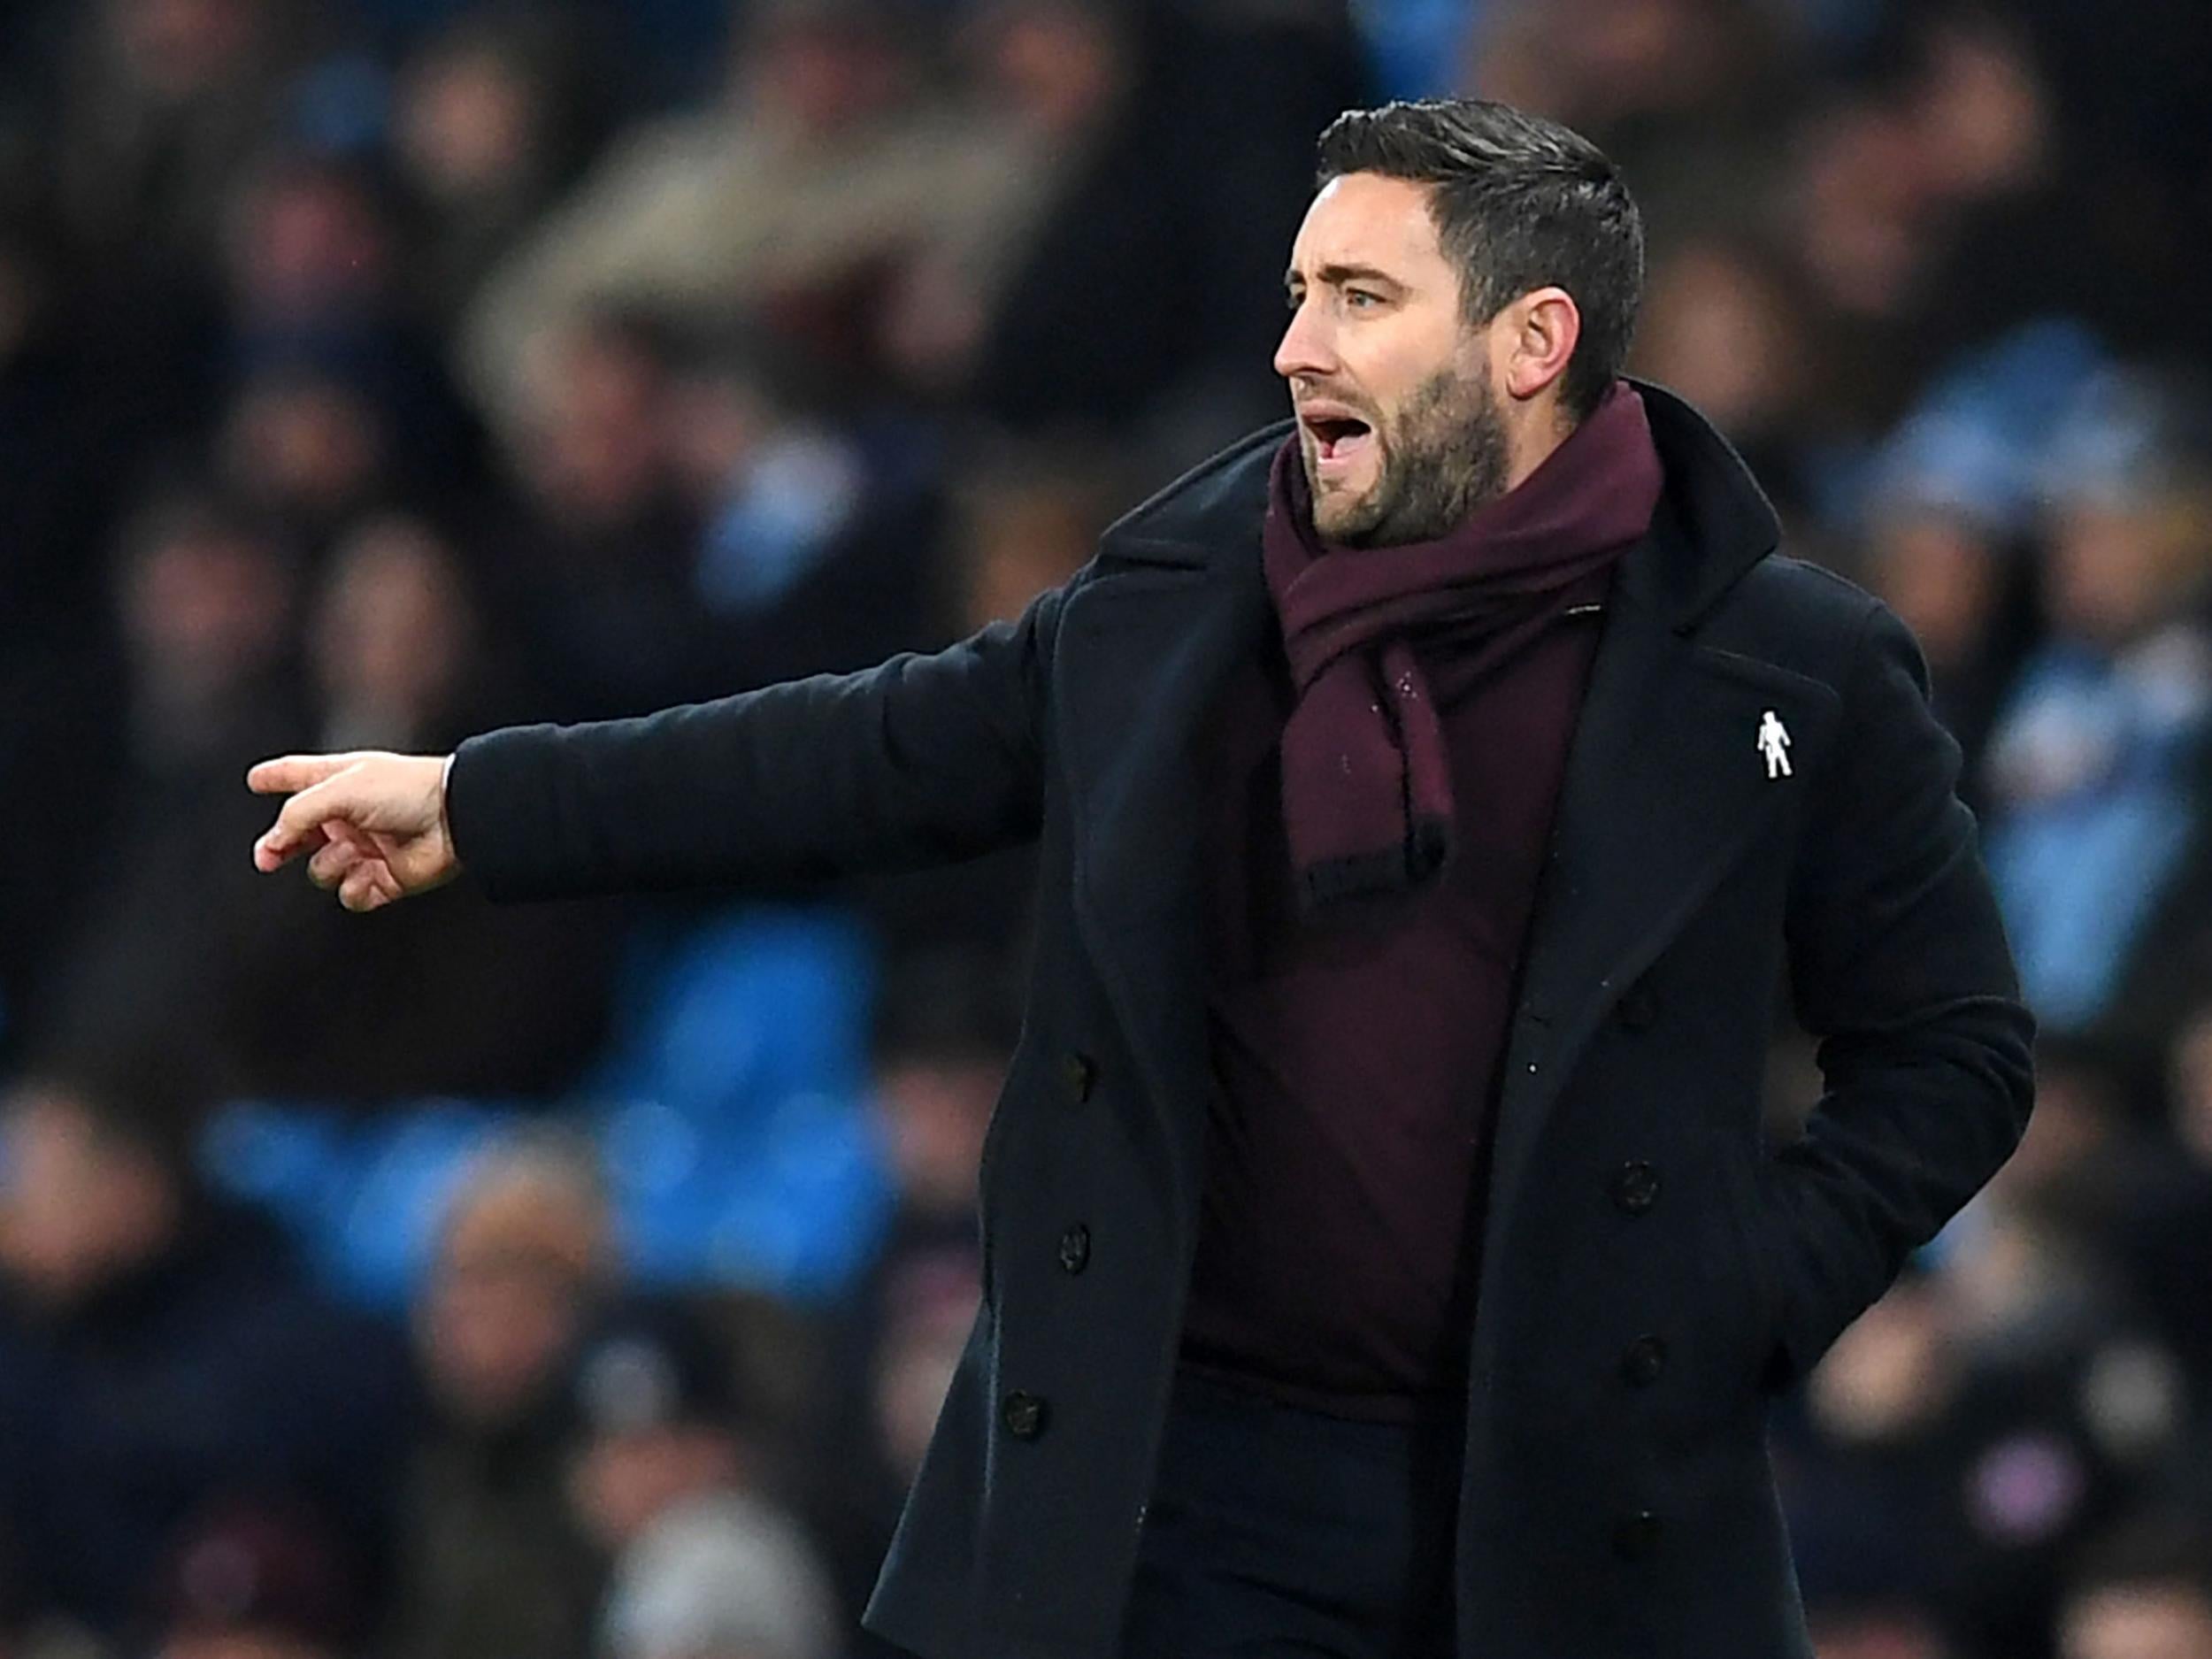 Lee Johnson was immensely proud of the performance from his players